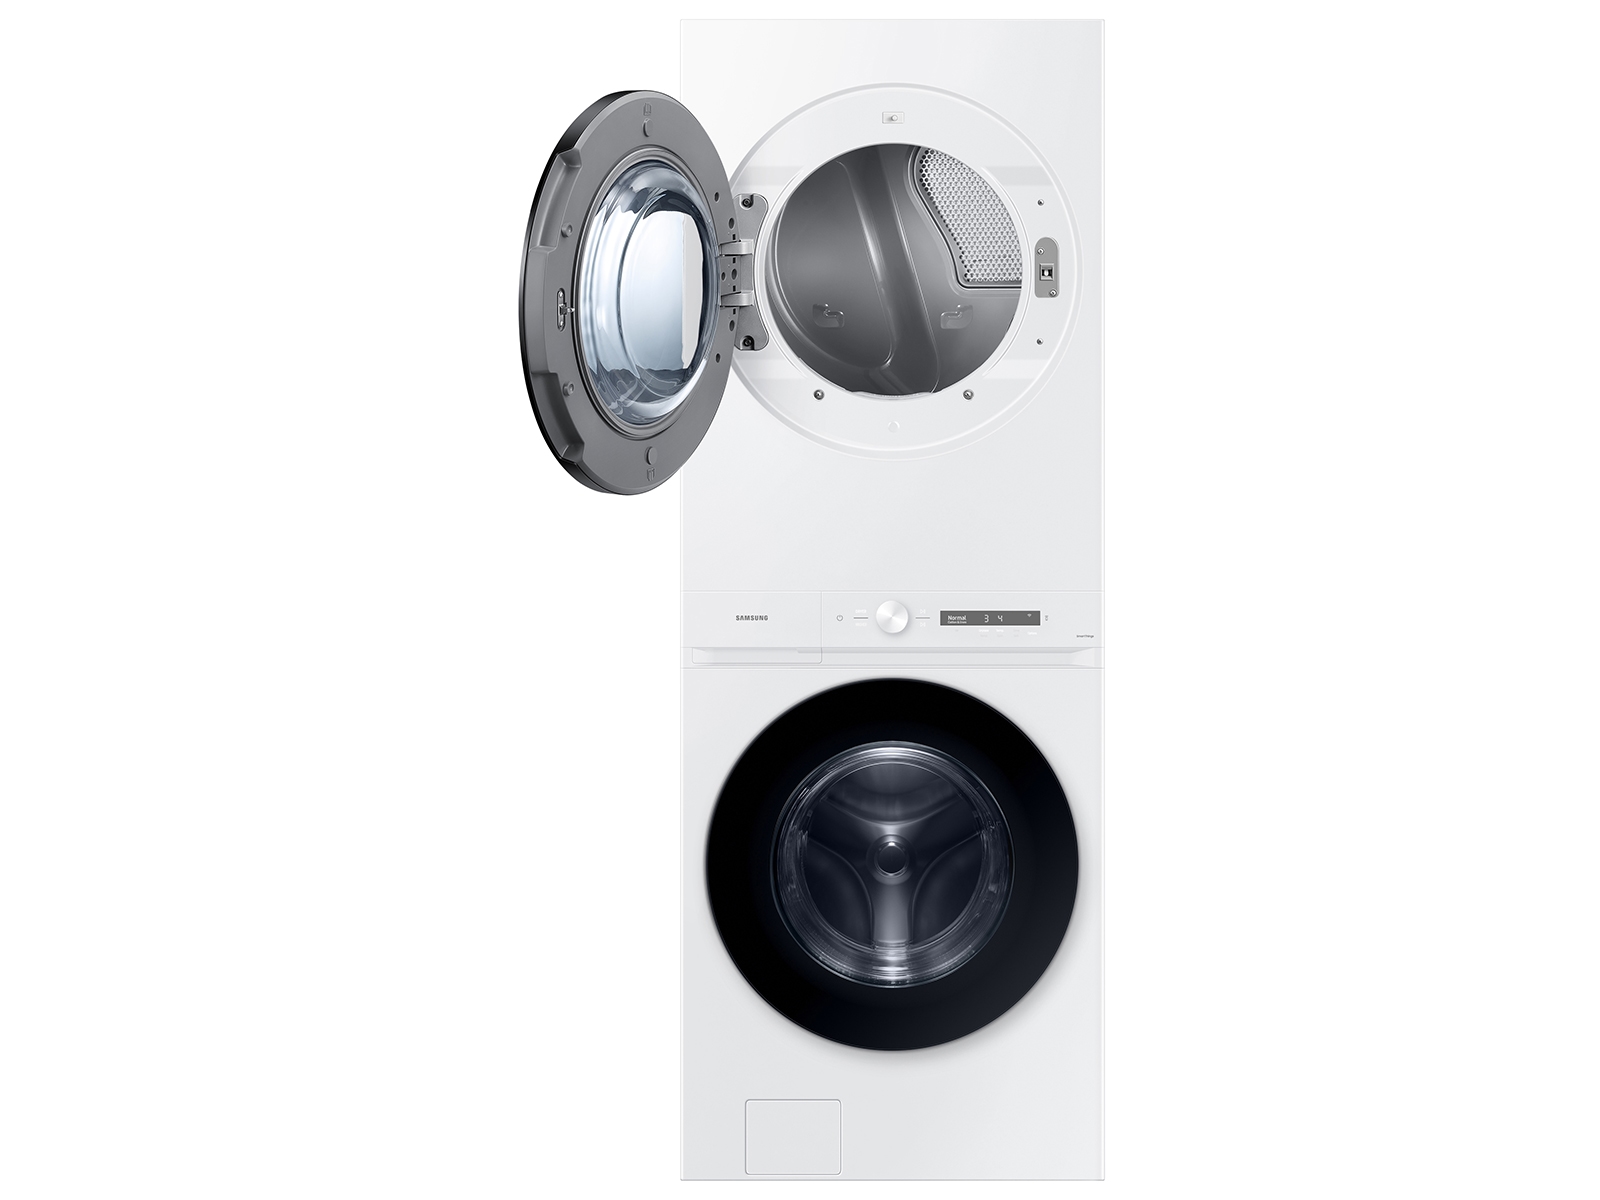 Thumbnail image of Bespoke 4.6 cu. ft. AI Laundry Hub™ Large Capacity Single Unit Washer with Steam Wash and 7.6 cu. ft. Electric Dryer in White